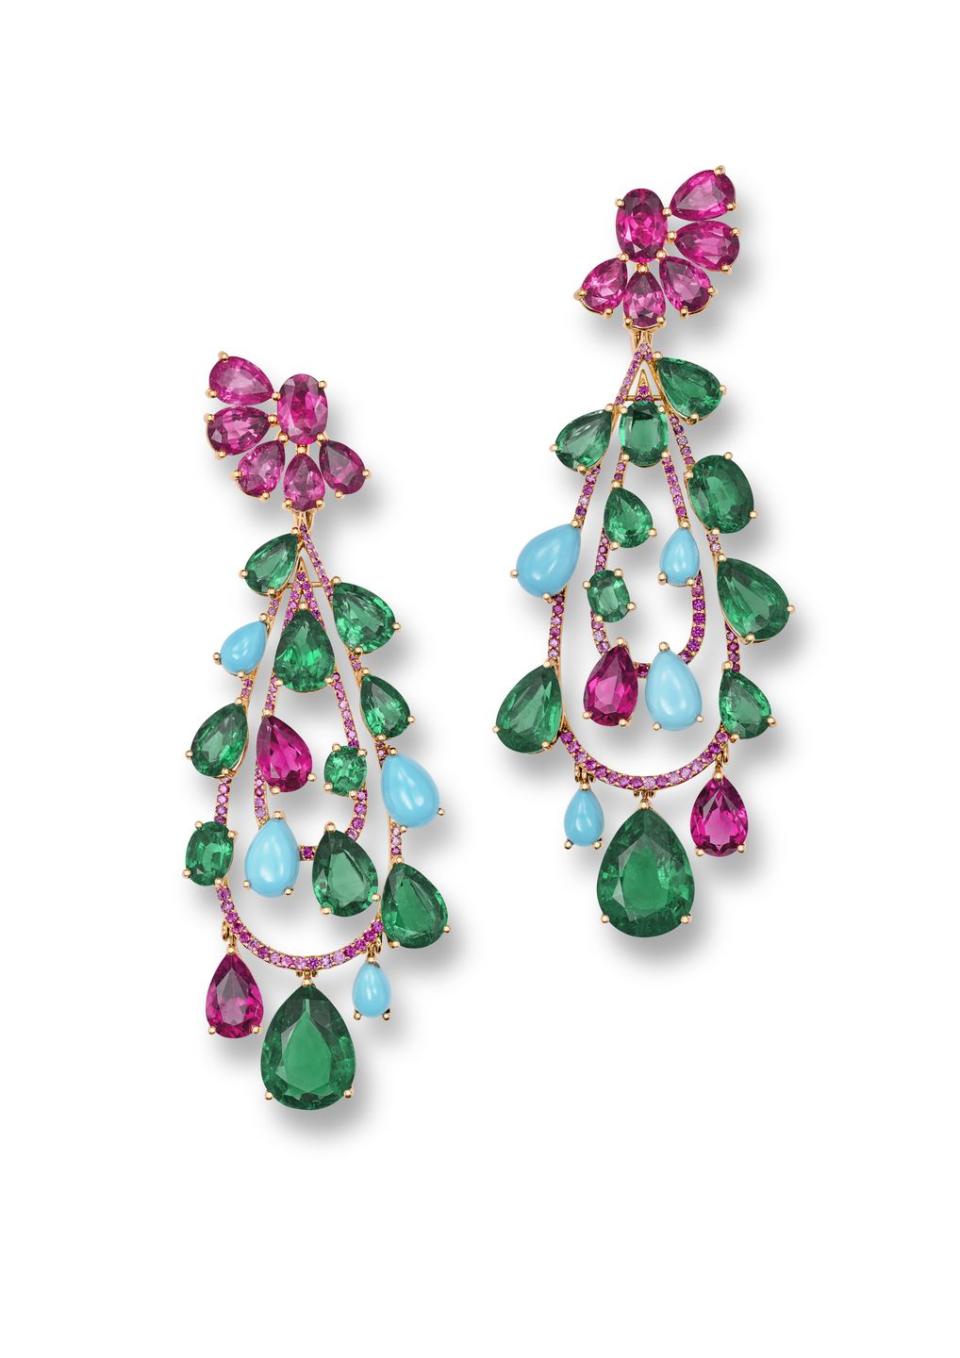 a pair of earrings with colorful beads